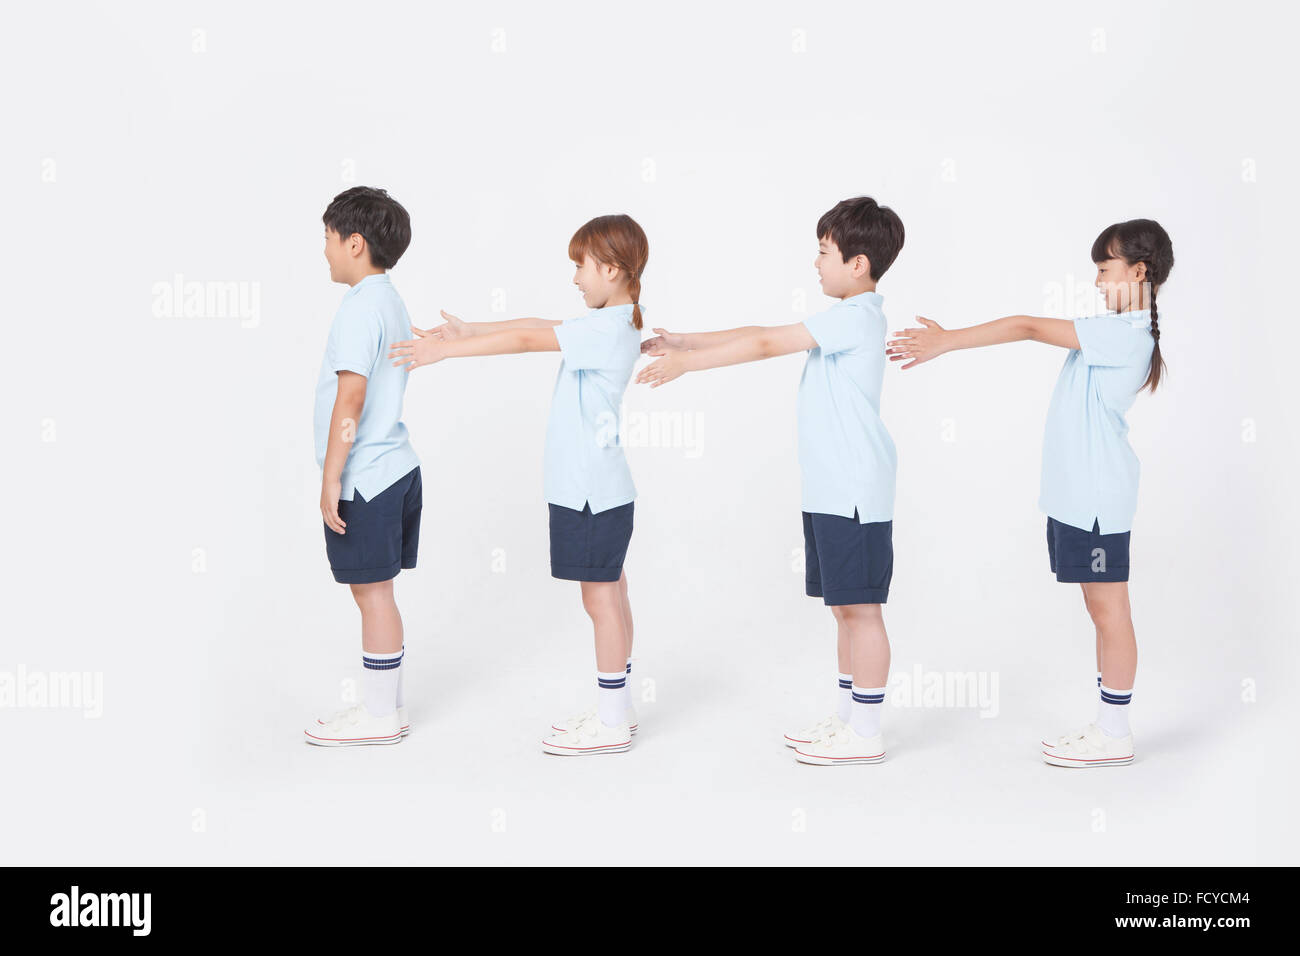 Four elementary school students in sportswear standing in line with their arms stretched forward Stock Photo